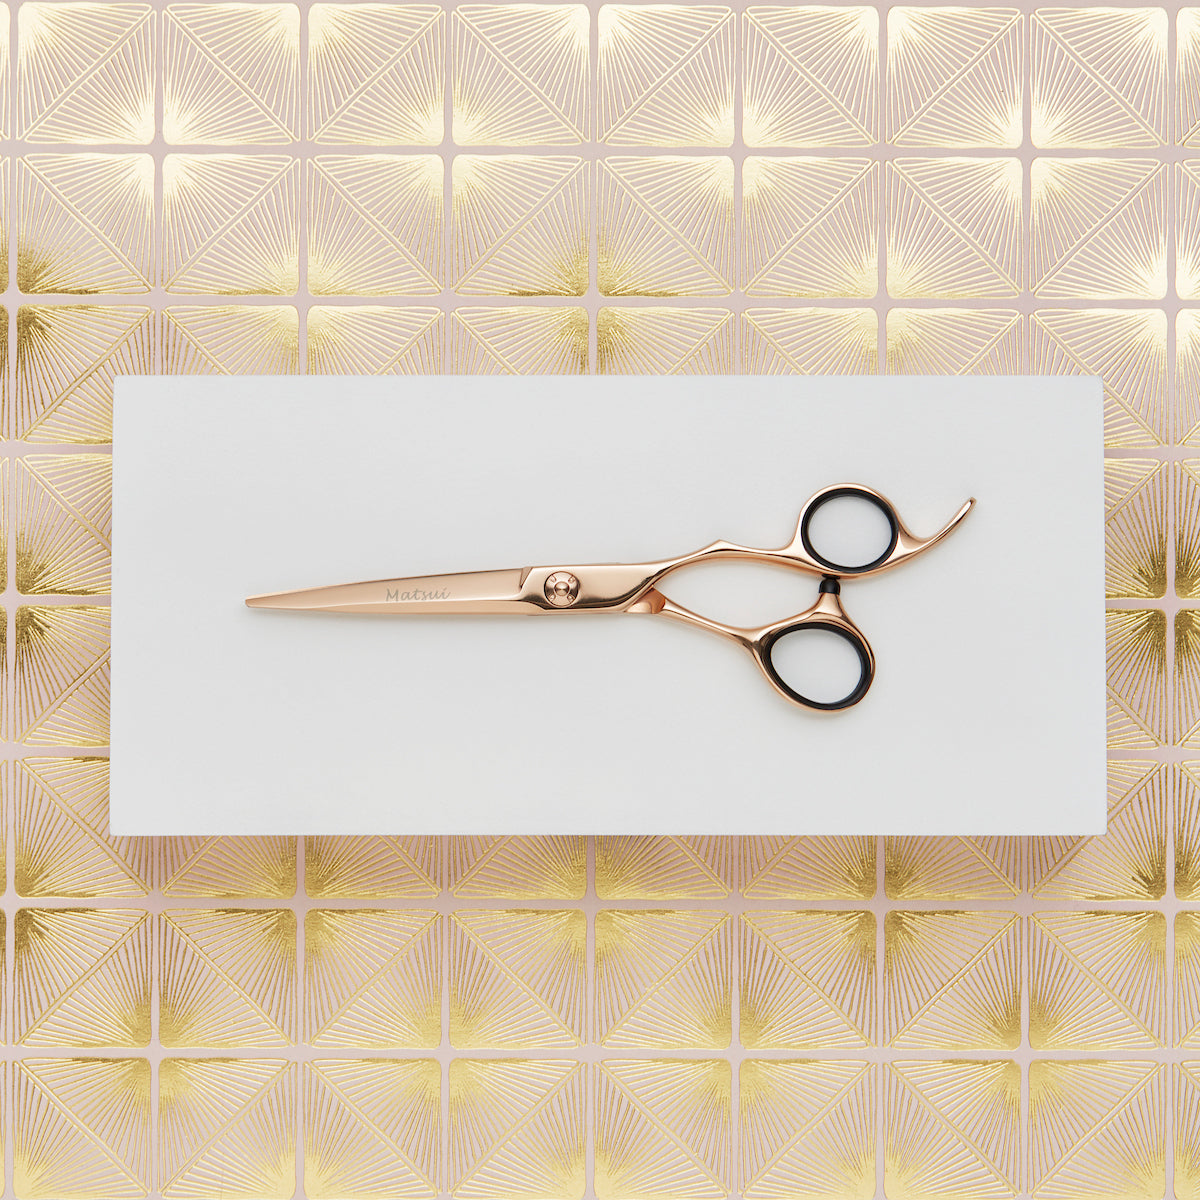 Stylish Acrylic Rose Gold Multipurpose Scissors Stainless Steel 6.3 Inches  Office Scissors Desktop Stationery for Cutting Heavy Duty Leather Arts